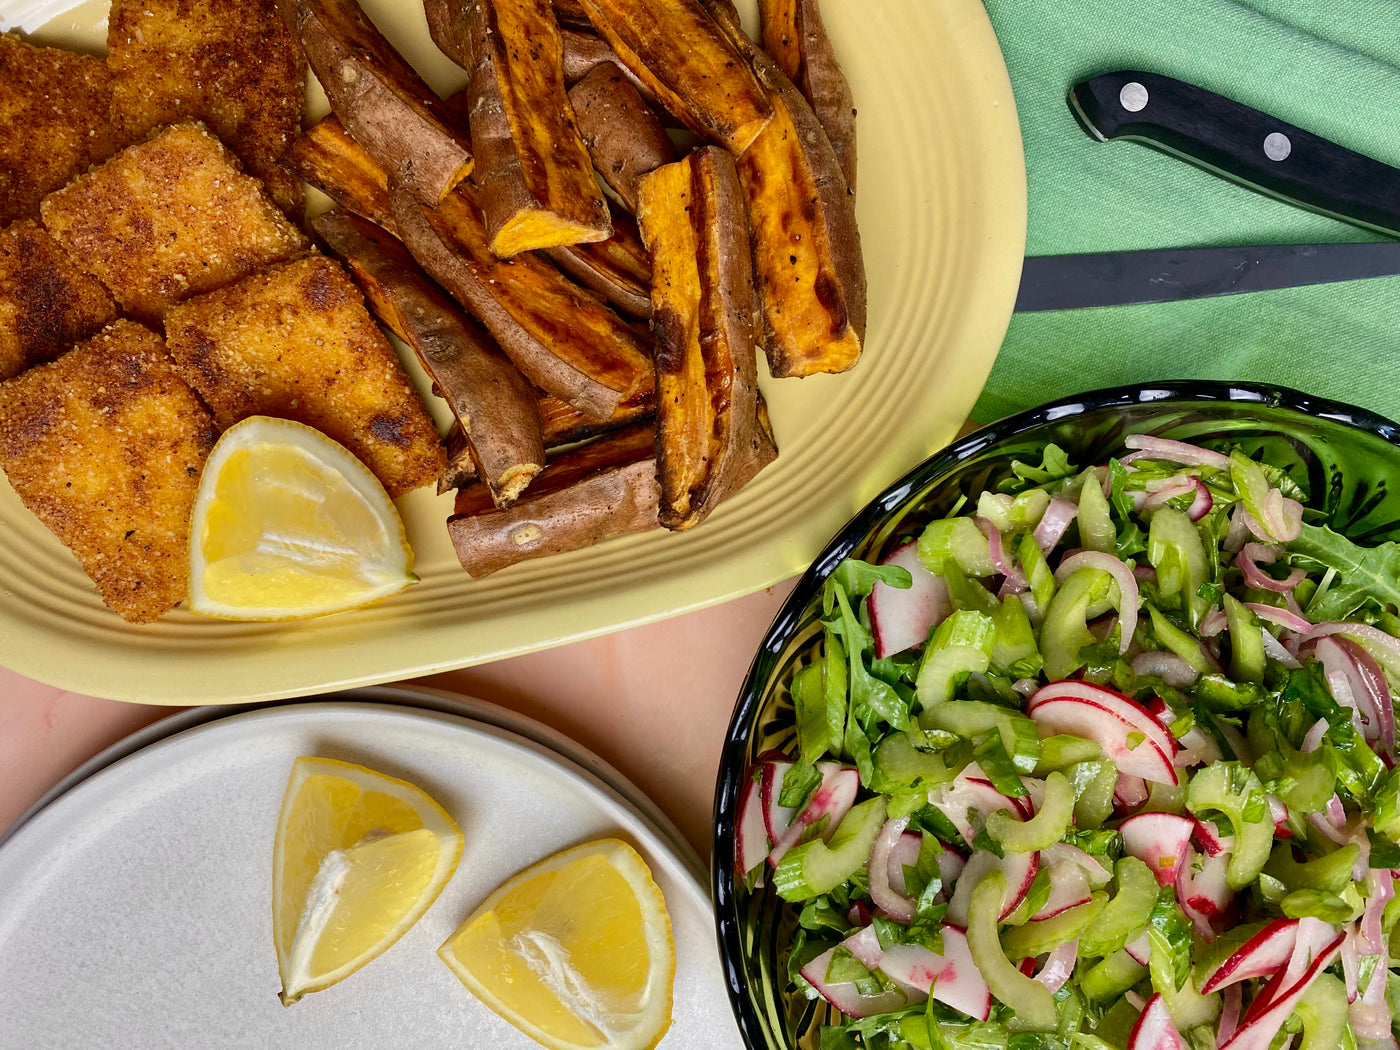 Schnitzel with Crunchy Salad and Sweet Potato Wedges